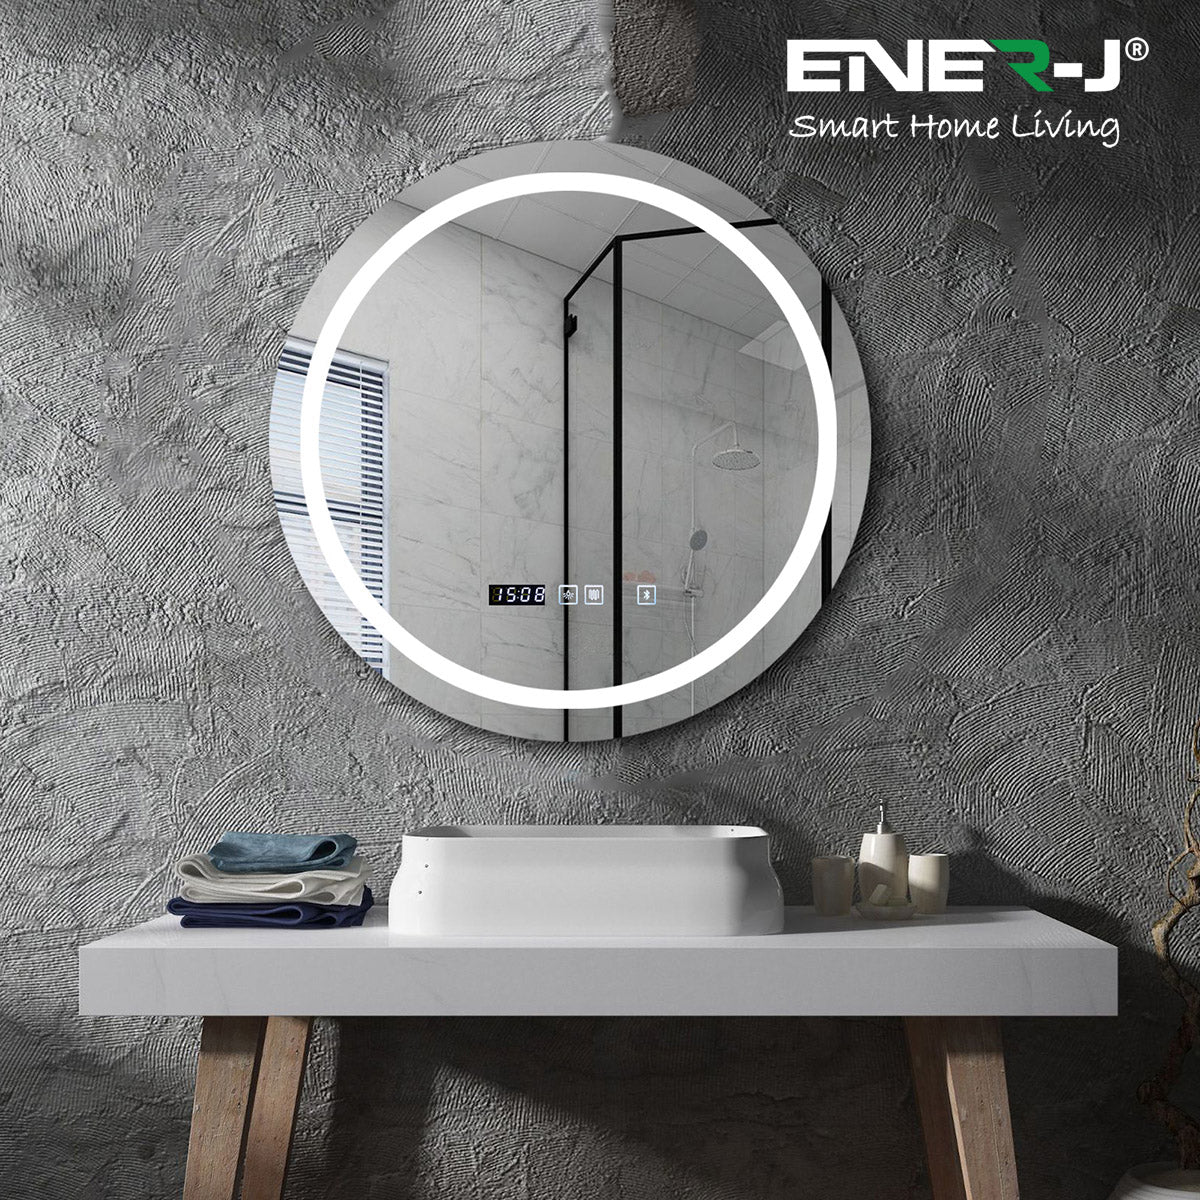 70 cms Round Bathroom Mirror with Bluetooth Speaker, LED Lights Illuminated Wall Mount Light-Up CCT Changing, Dimmable Touch Switch Horizontal/Vertical